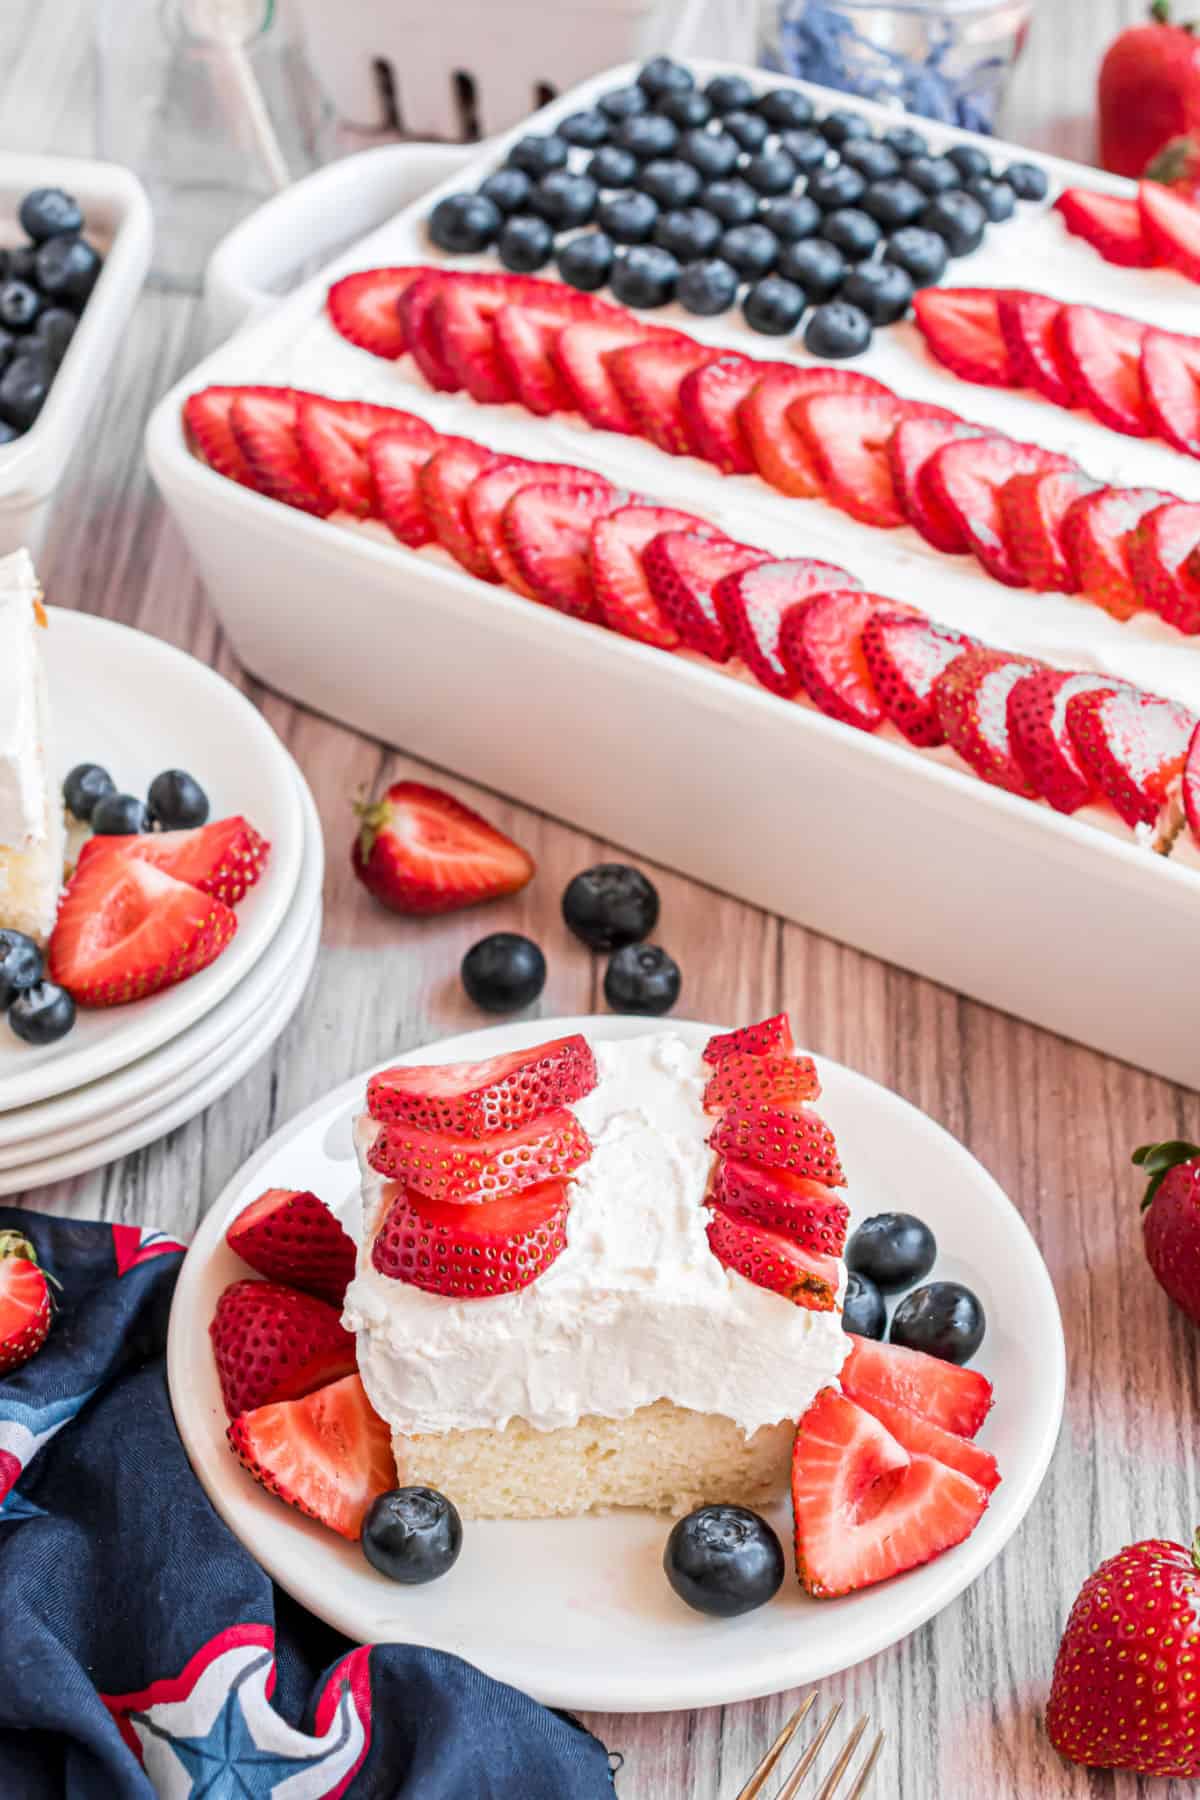 Slice of white cake with fresh berries to mimic an American flag.